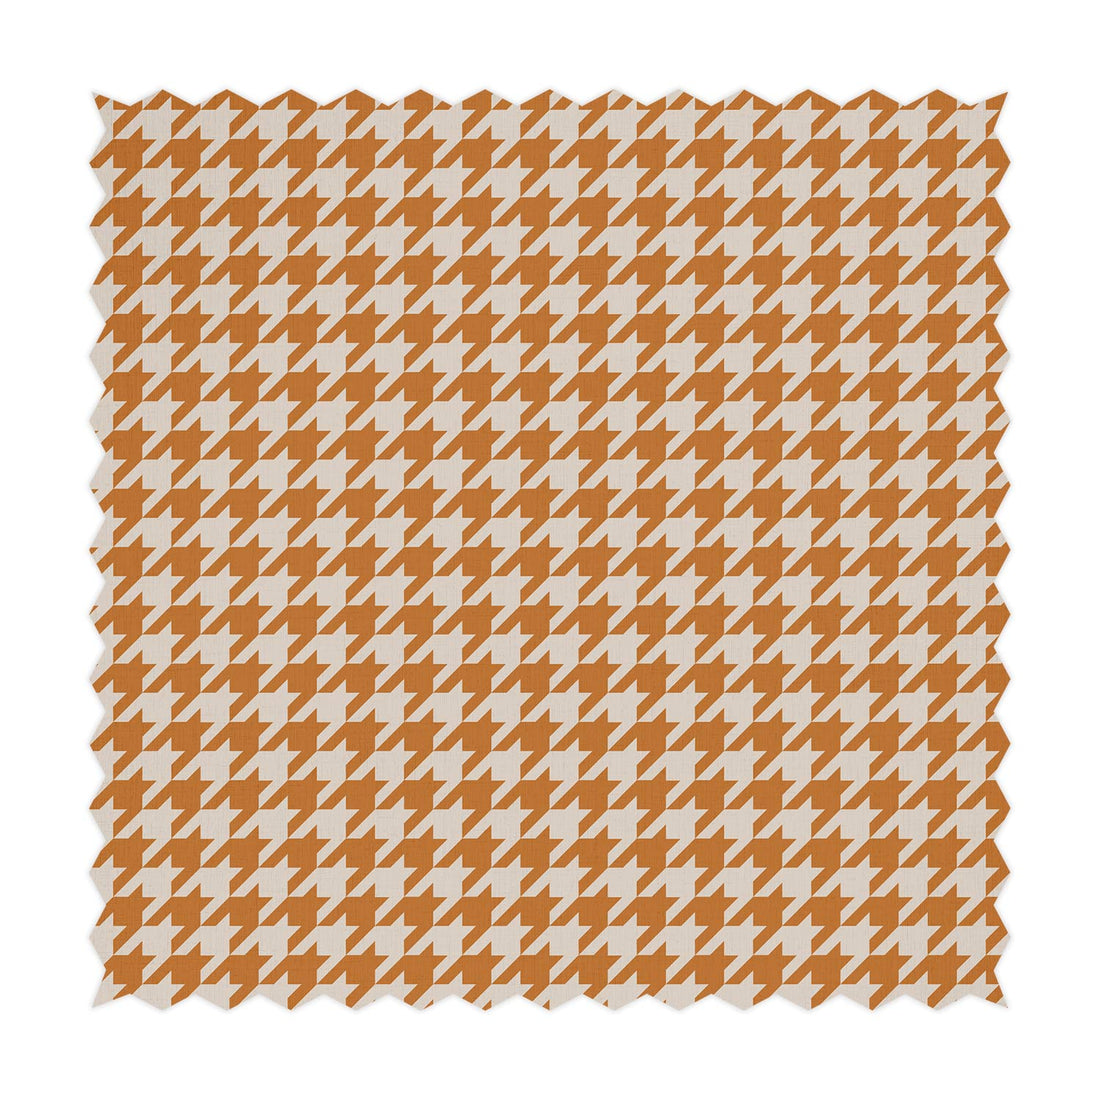 vintage textiles with houndstooth pattern in orange